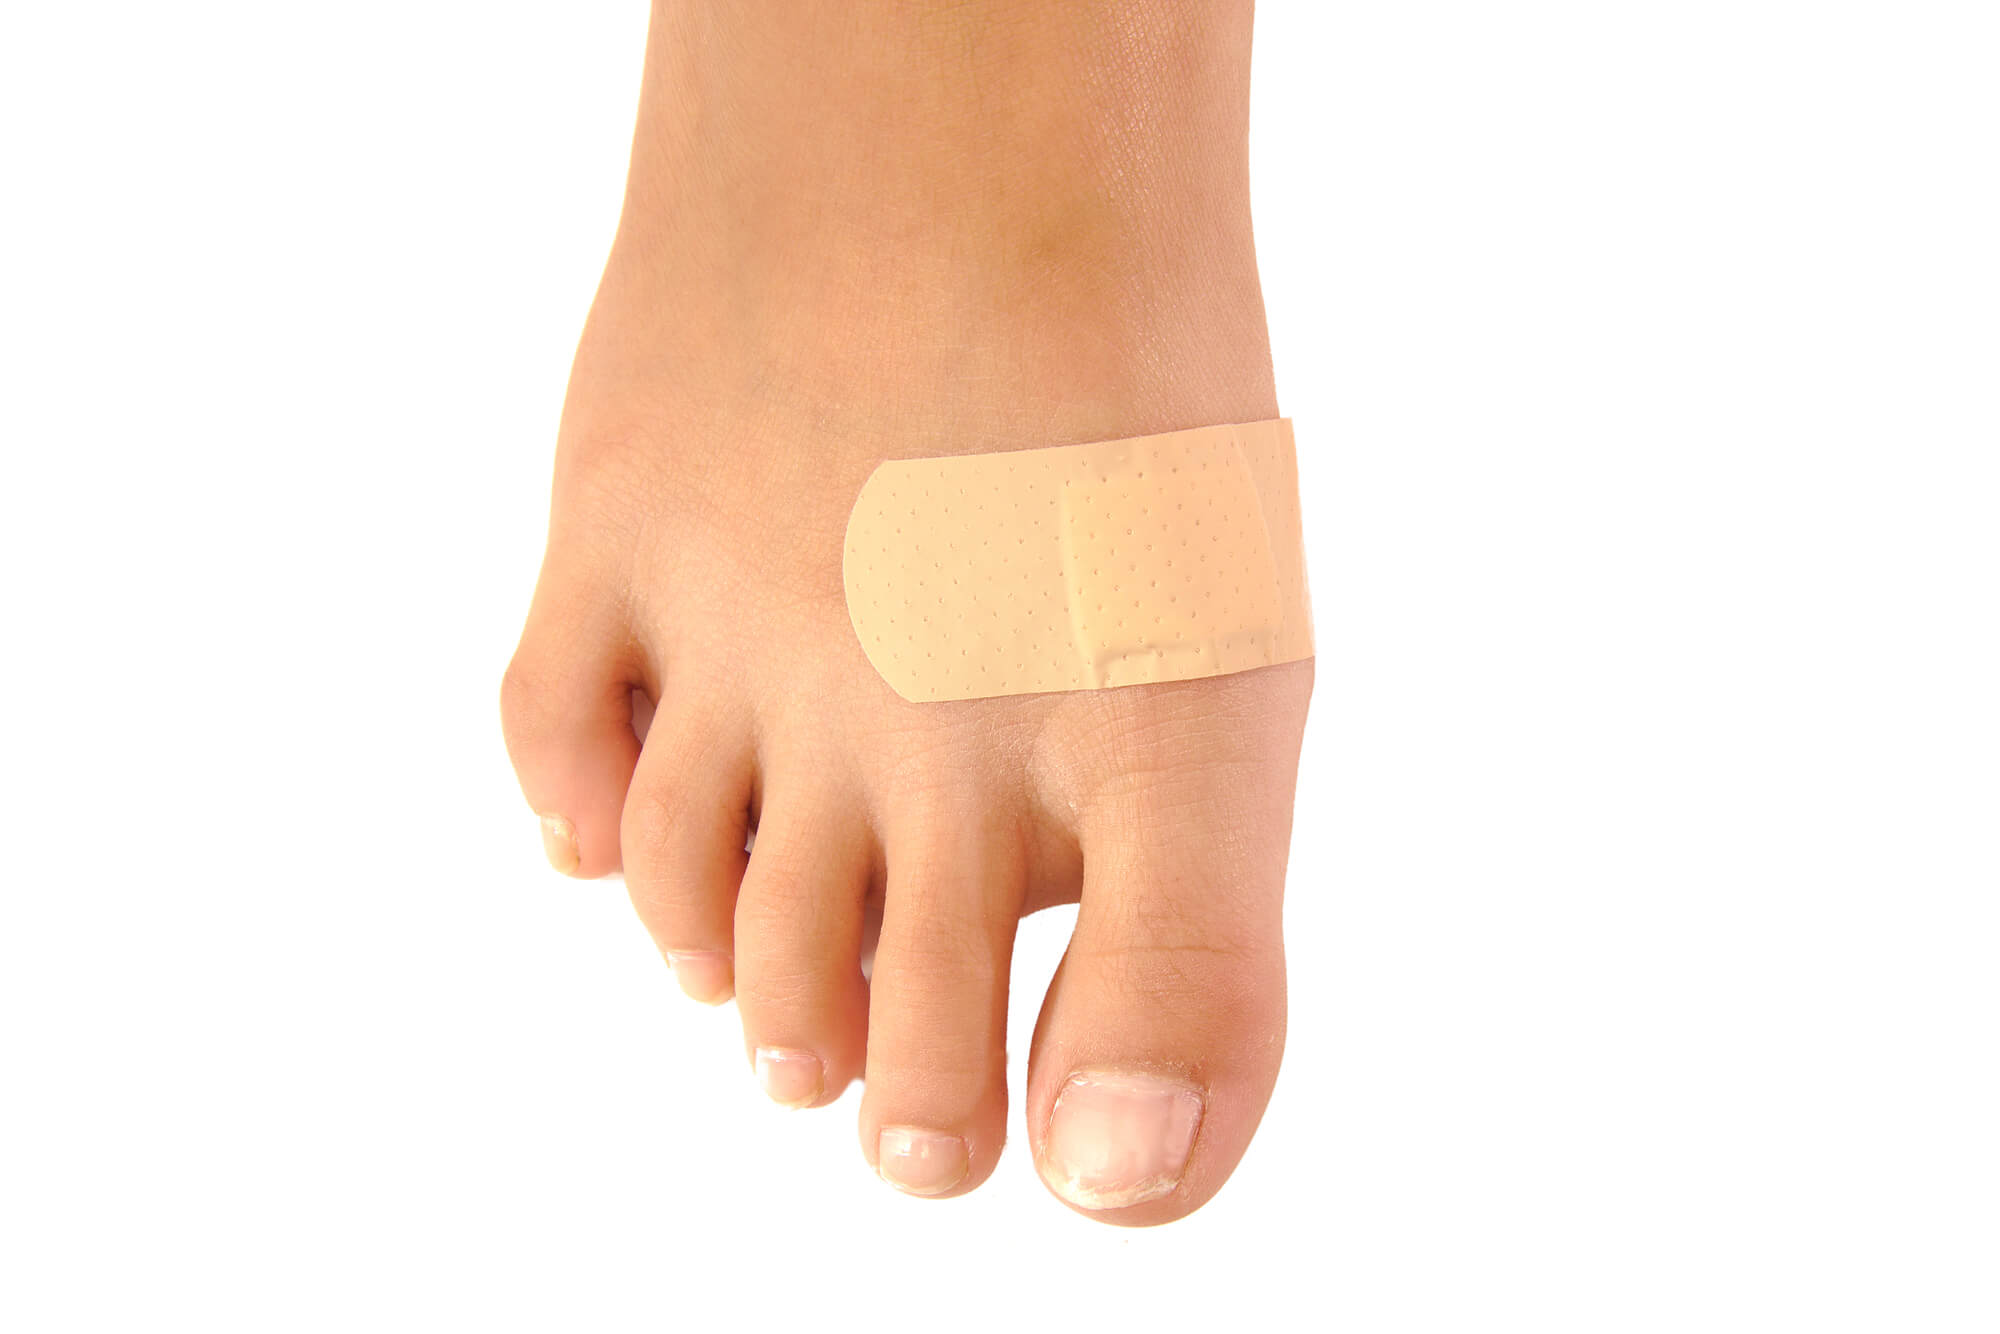 Band-aid on Foot